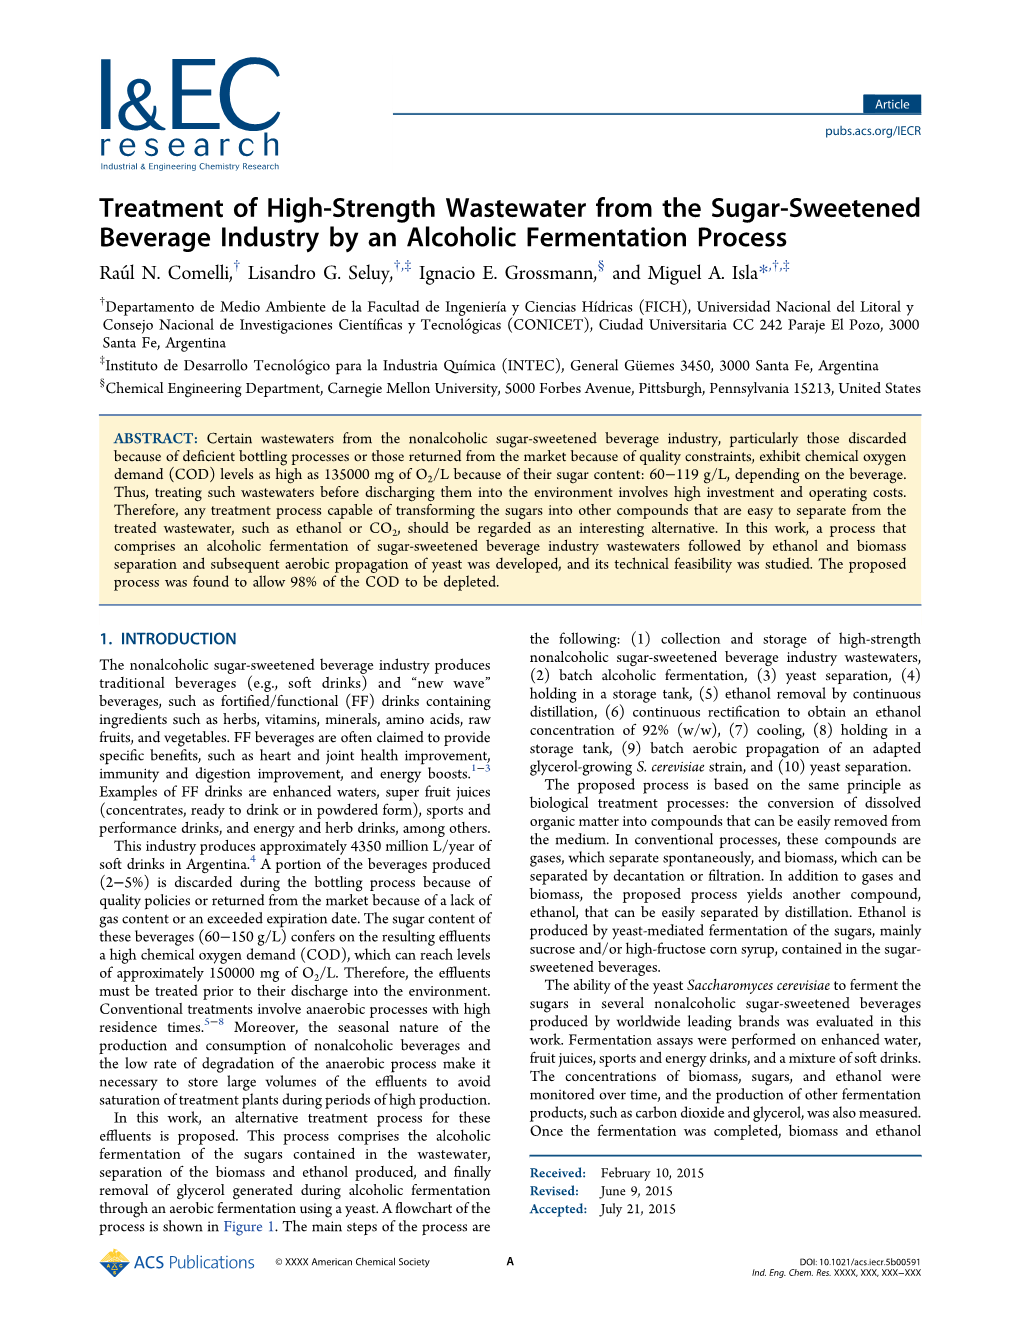 The Treatment of High-Strength Wastewater from the Sugar